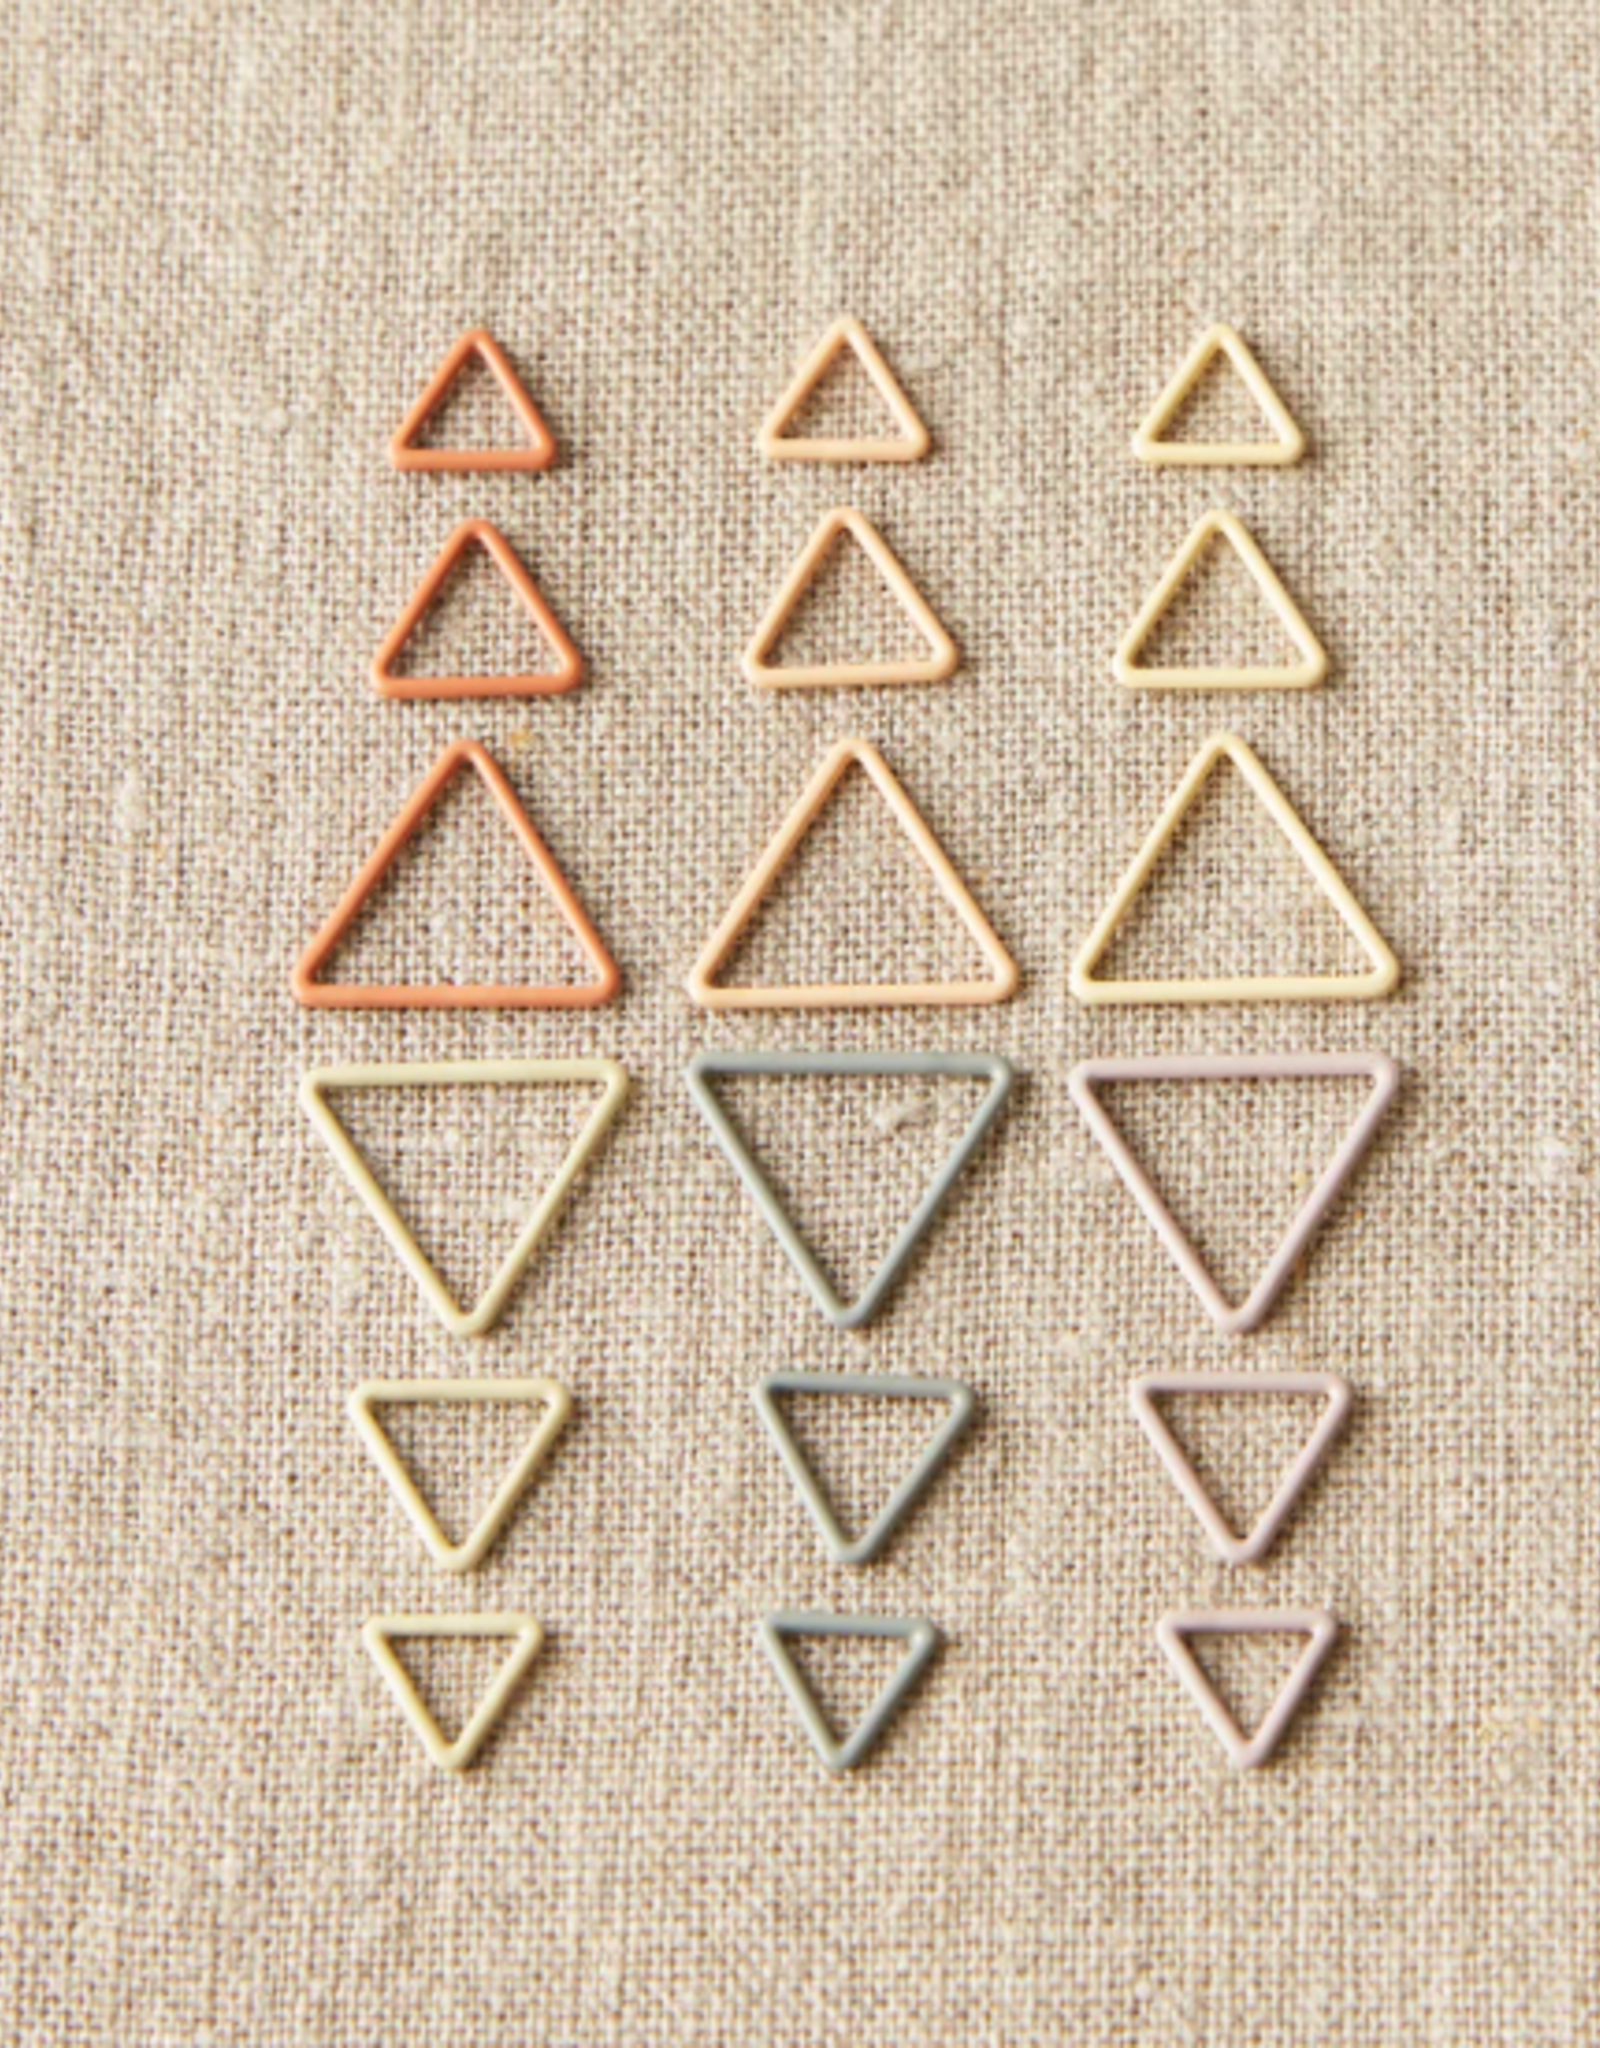 Cocoknits Earth Tones Triangle Stitch Markers by Cocoknits